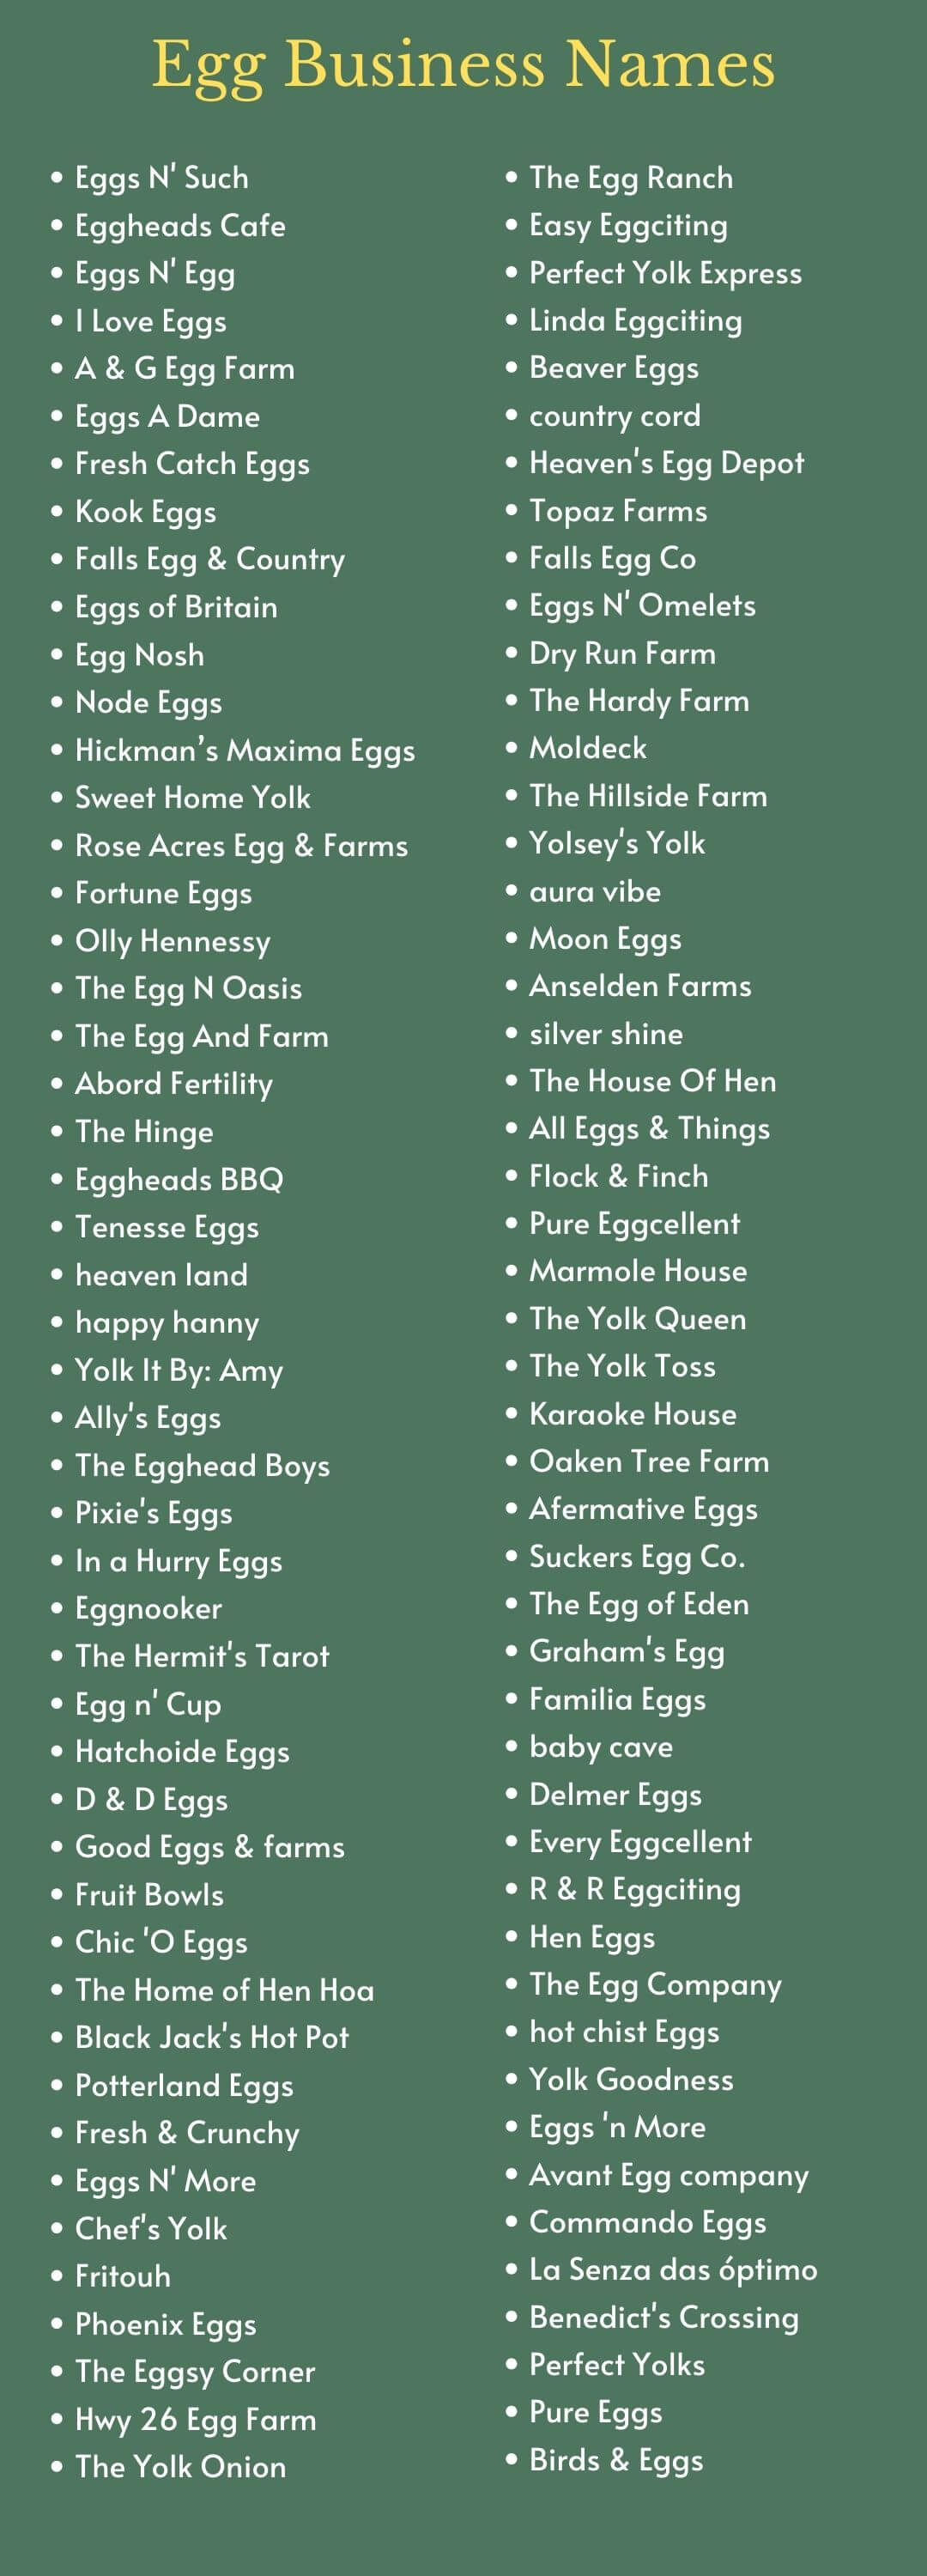 Egg Business Names: Infographic